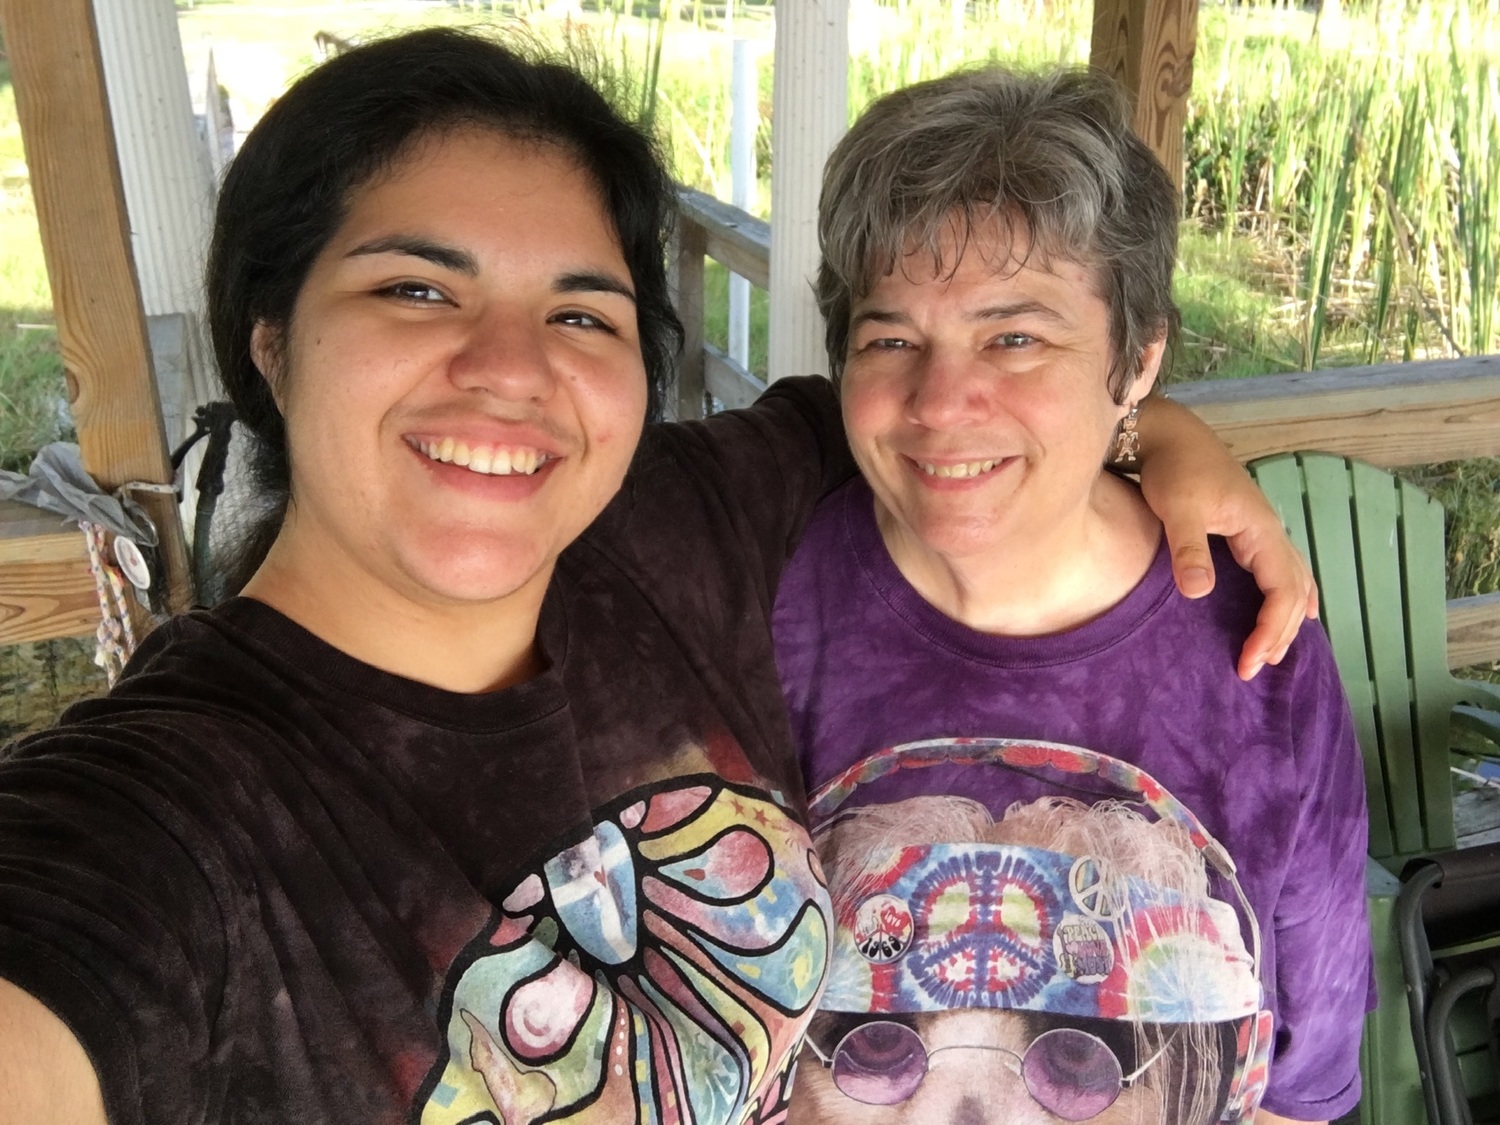 Gallery Photo of My daughter Xochitl and I are living our dreams, traveling together full time in an RV, creating music, workshops and videos. Live your dreams too!